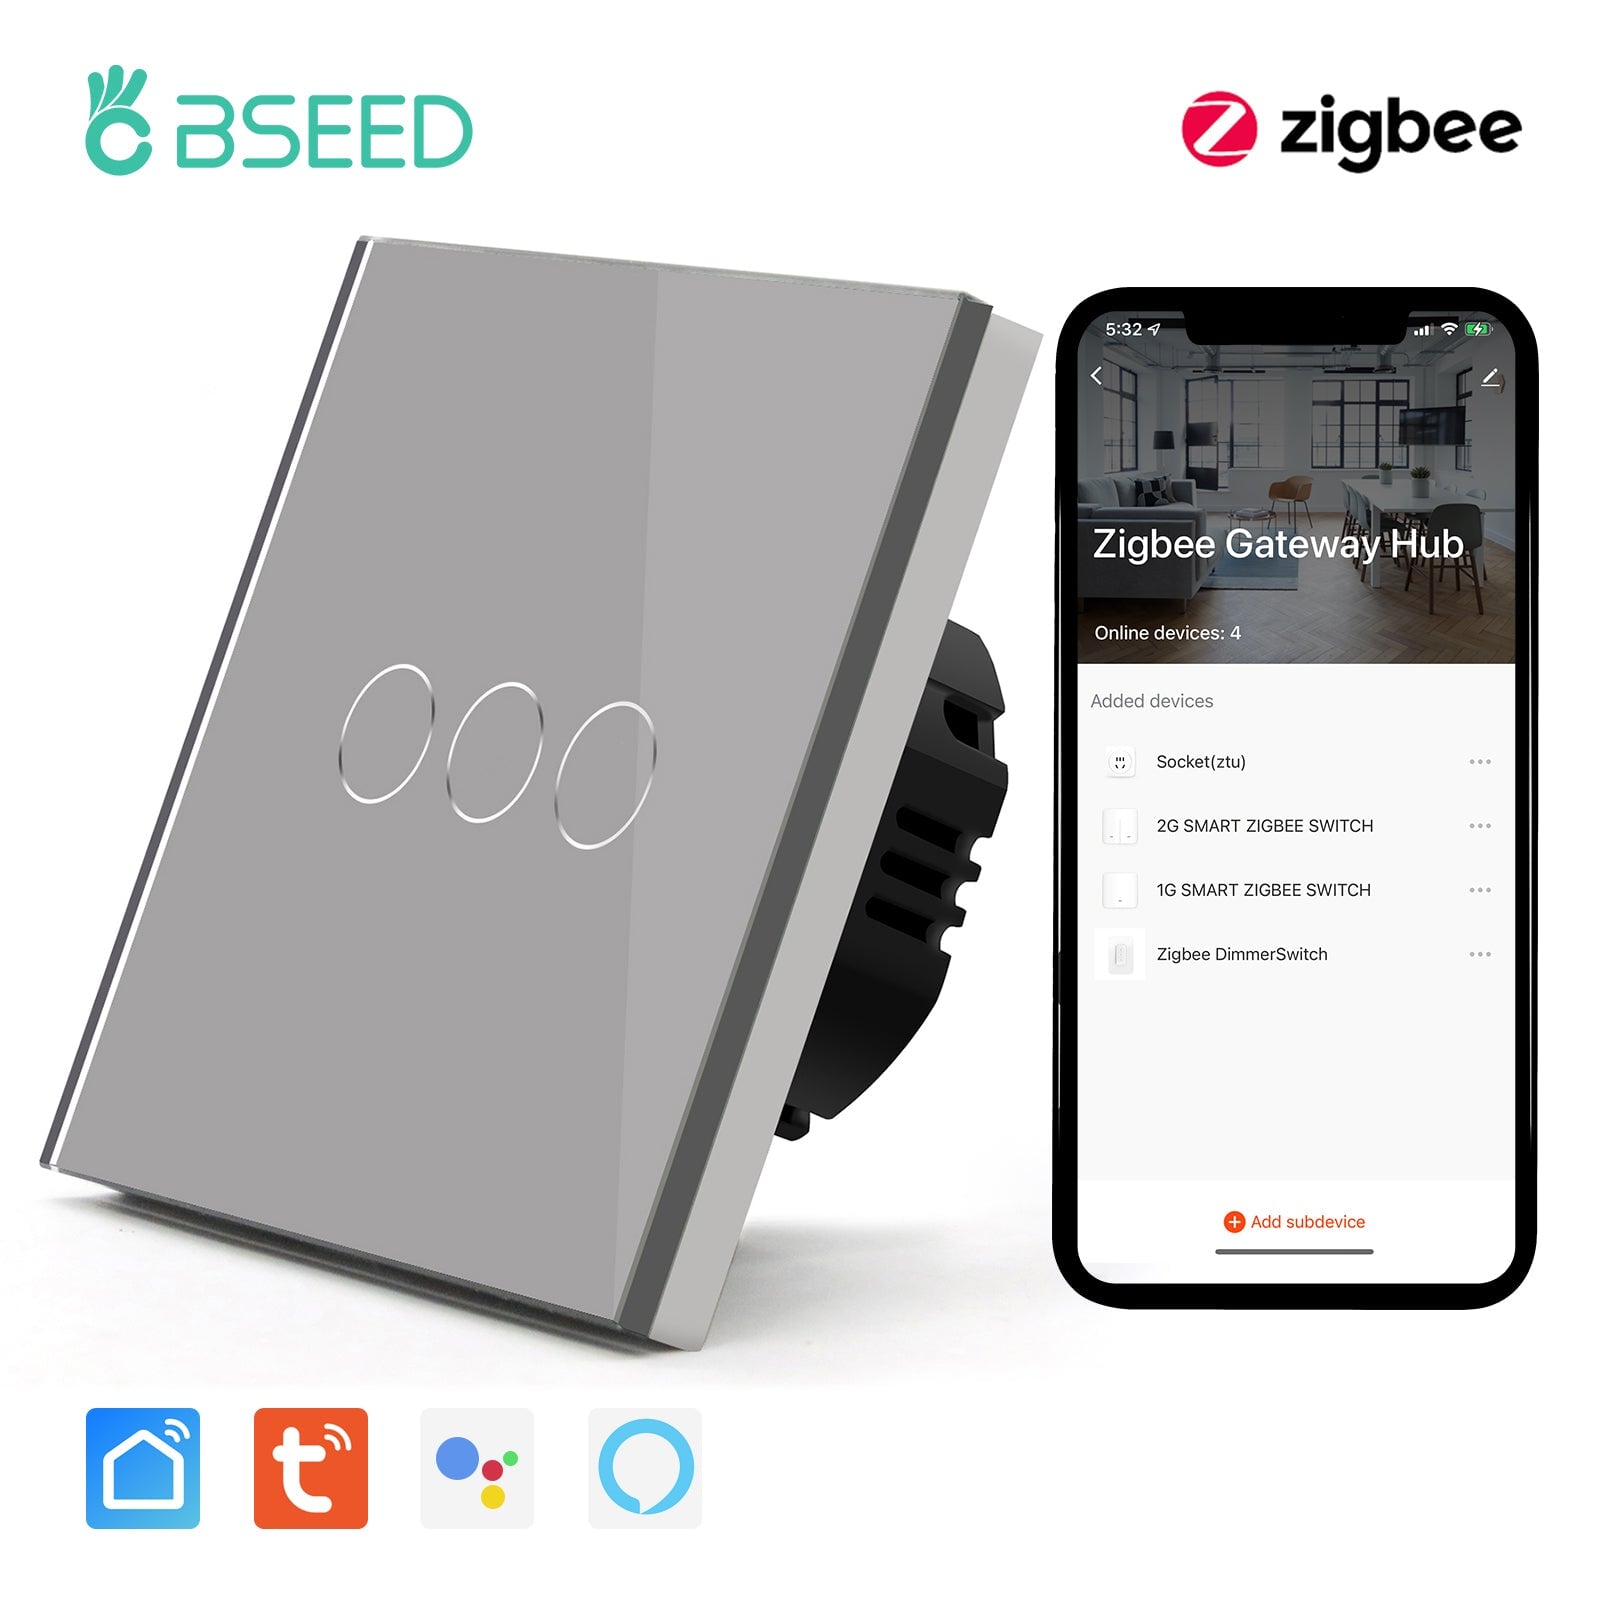 BSEED Zigbee Single Live Line Switch 1/2/3 Gang 1/2/3 Way Wall Smart Light Switch Single Live Line 1/2/3 pack Light Switches Bseedswitch Grey 3Gang 1 Pcs/Pack